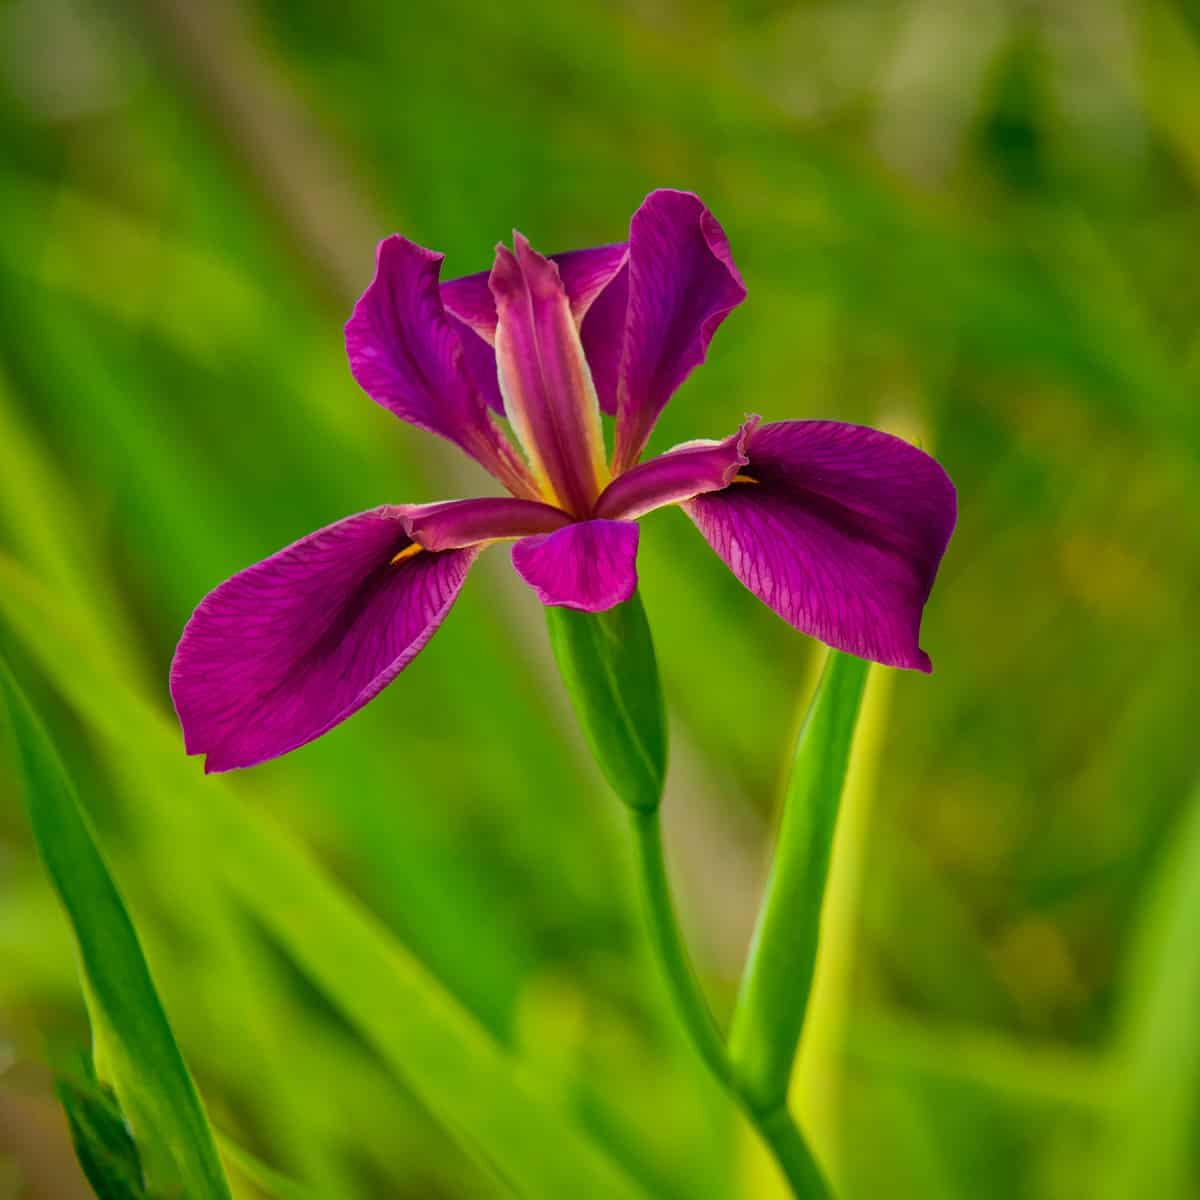 This iris was growing around an ornamental pond in Evergreen, Alabama.